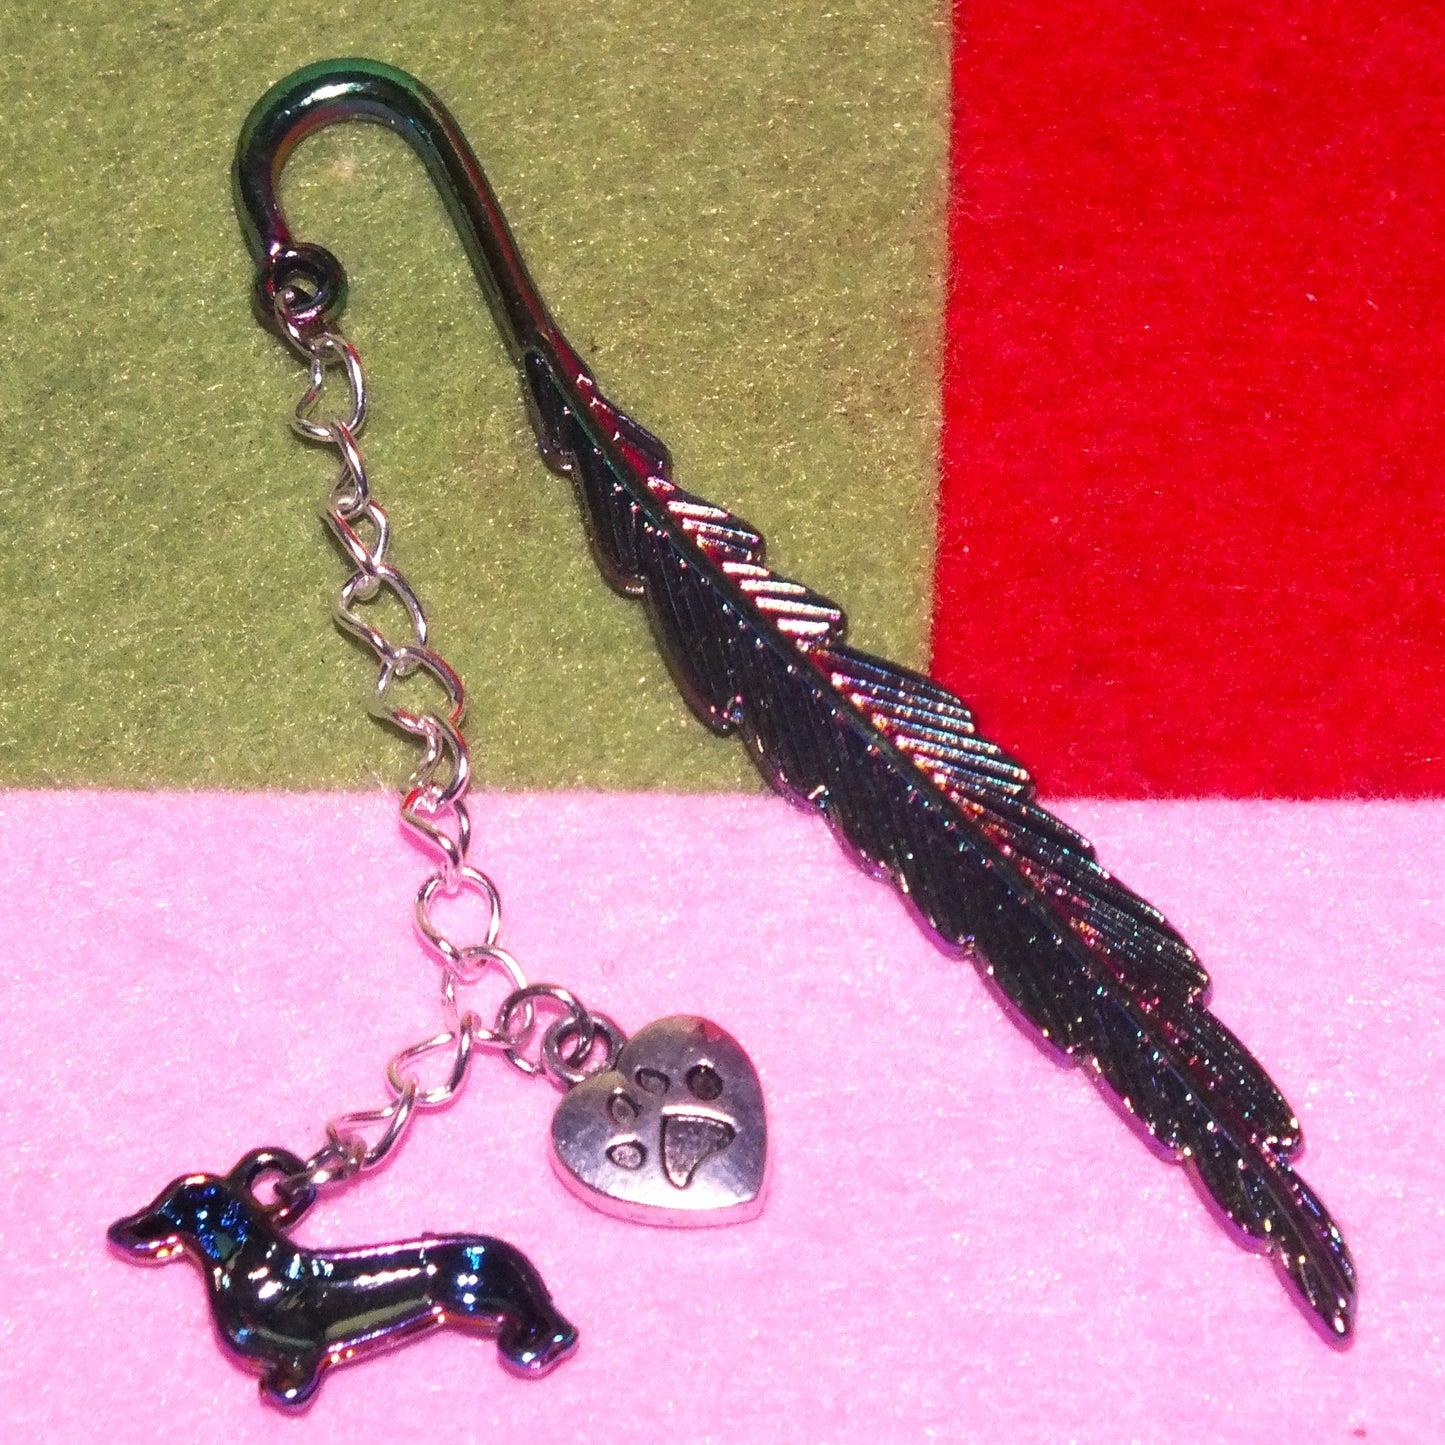 Sausage dog (Dachshund) bookmark with feather design, electroplated rainbow